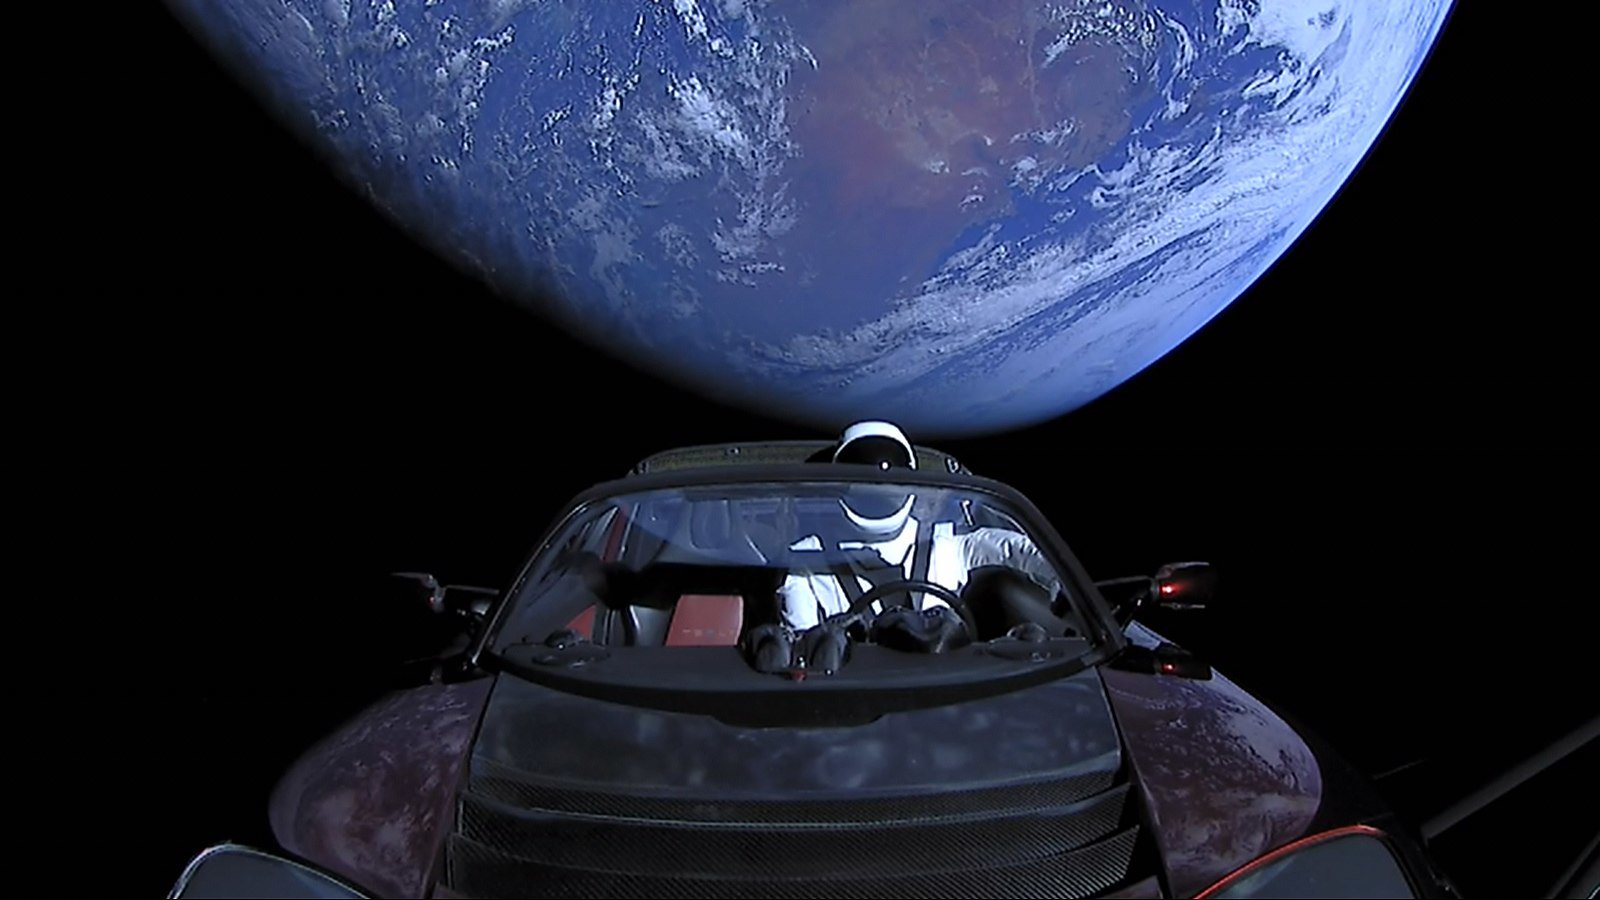 Elon Musk’s Tesla Roadster, with Earth in background. “Starman” mannequin wearing SpaceX Spacesuit in driving seat. Photo by SpaceX, via Wikimedia Commons.